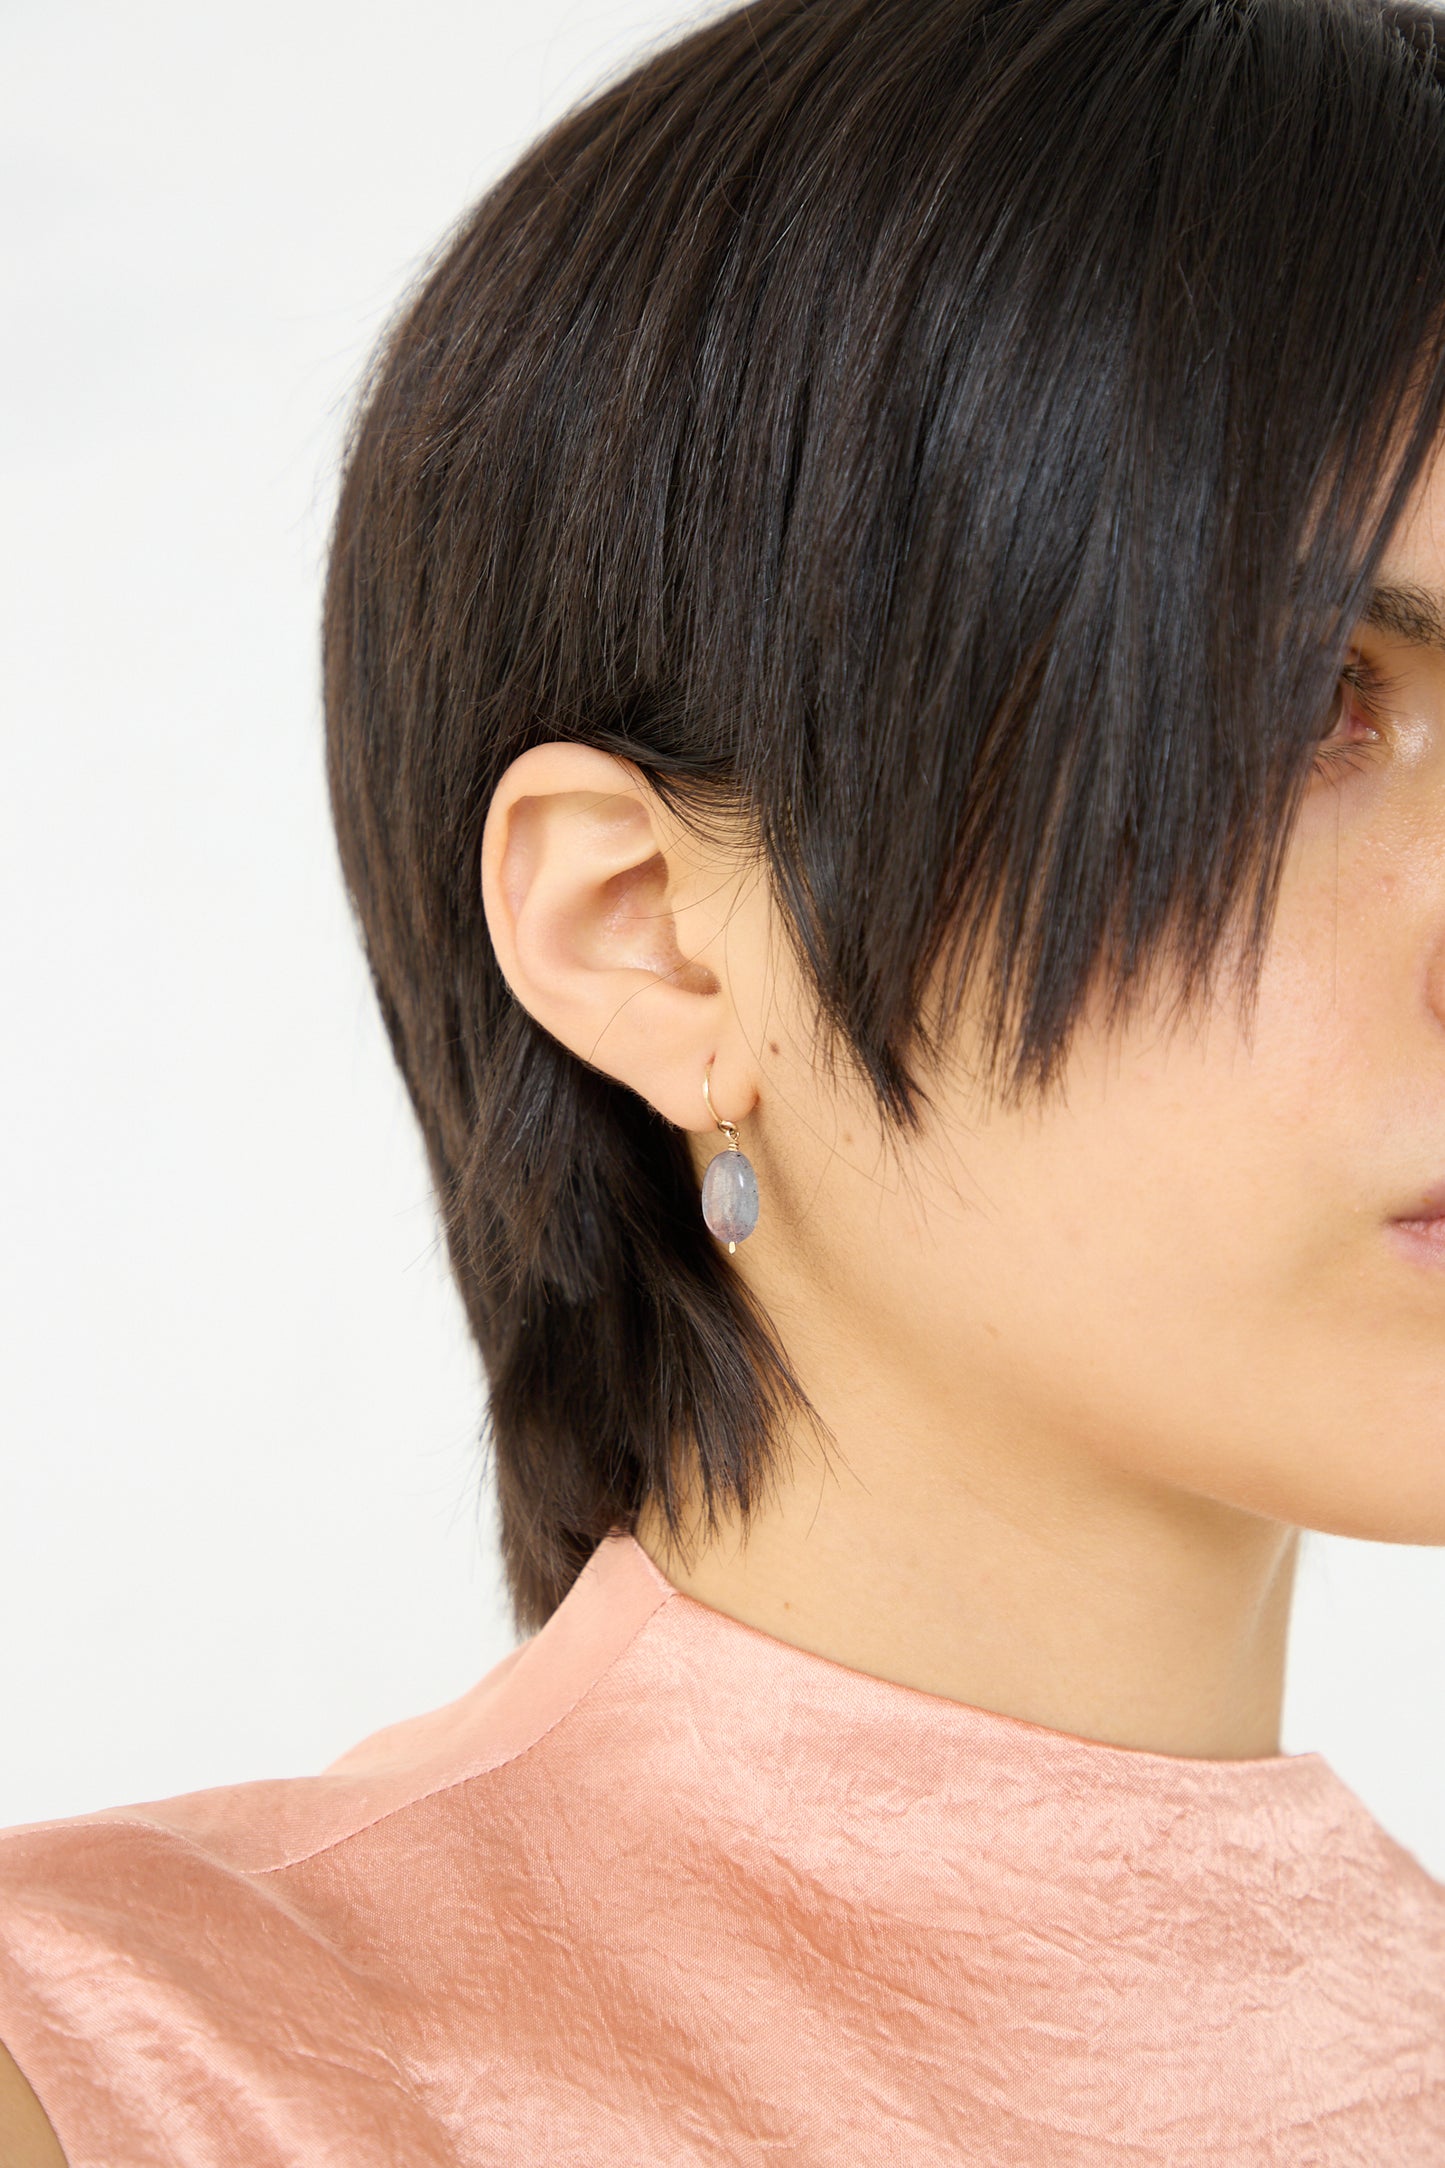 A woman wearing a pink top and Mary MacGill's 14K Crescent Charm Earrings in Iolite. Up close. Profile view.